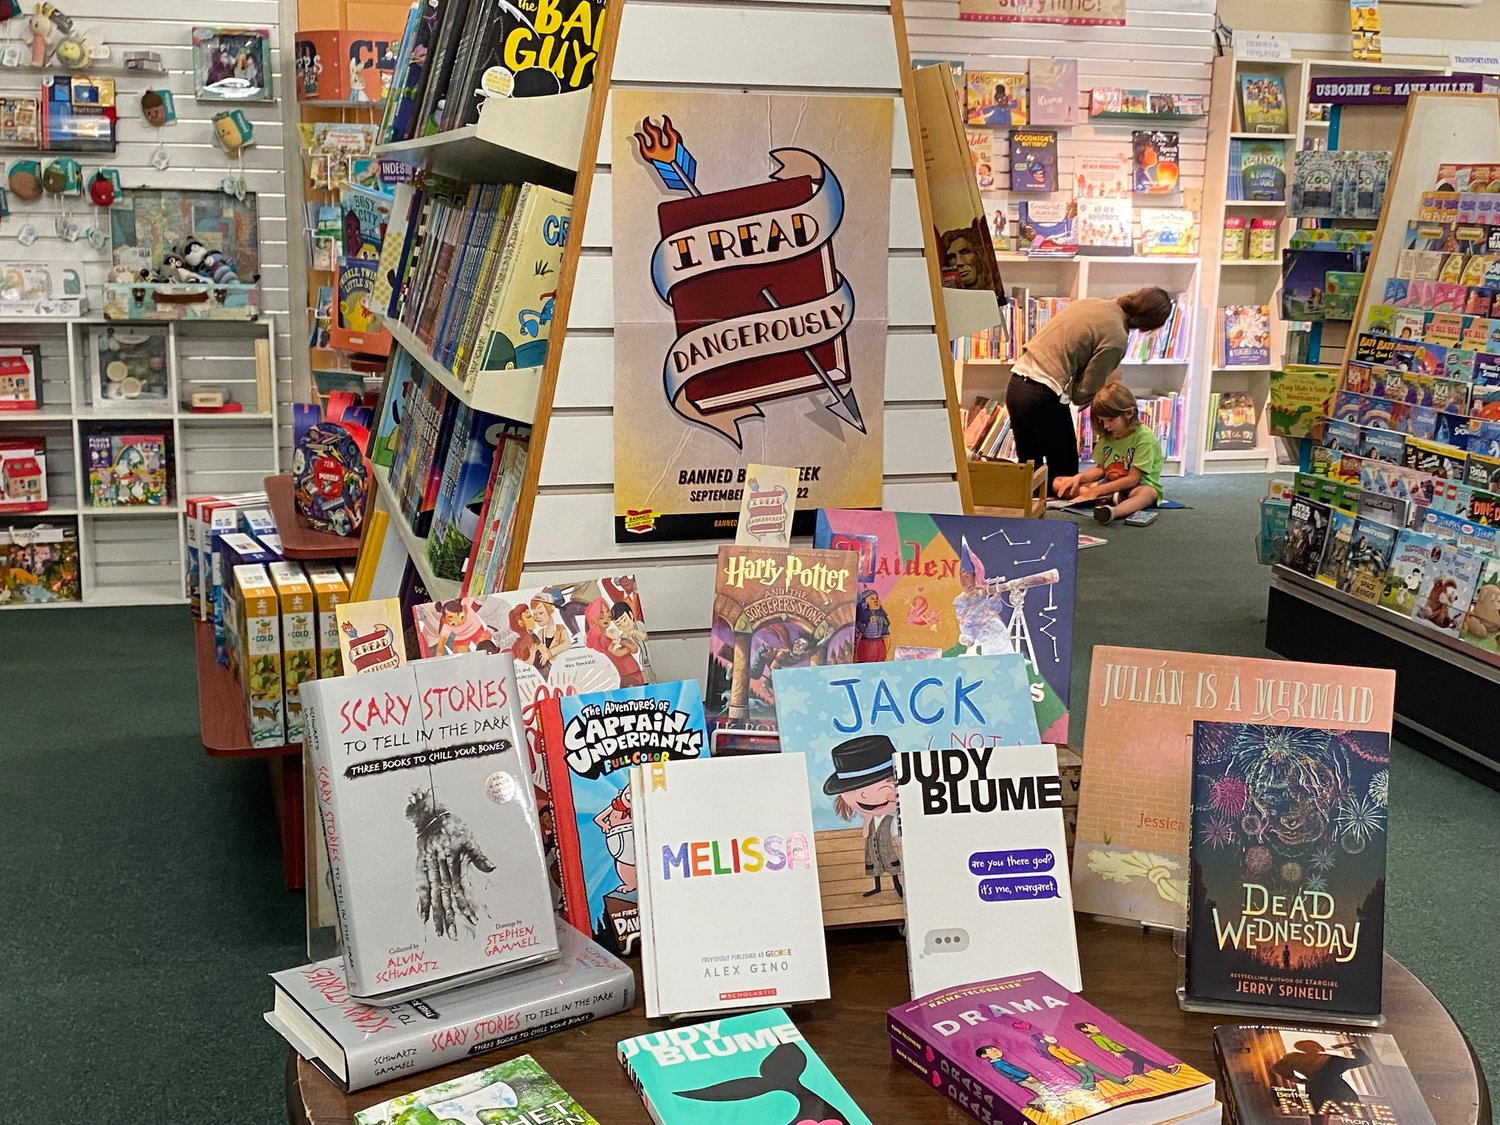 A children’s display holds works by Judy Blume, Alex Gino, and J.K Rowling. “I Read Dangerously” says the sign above the books.